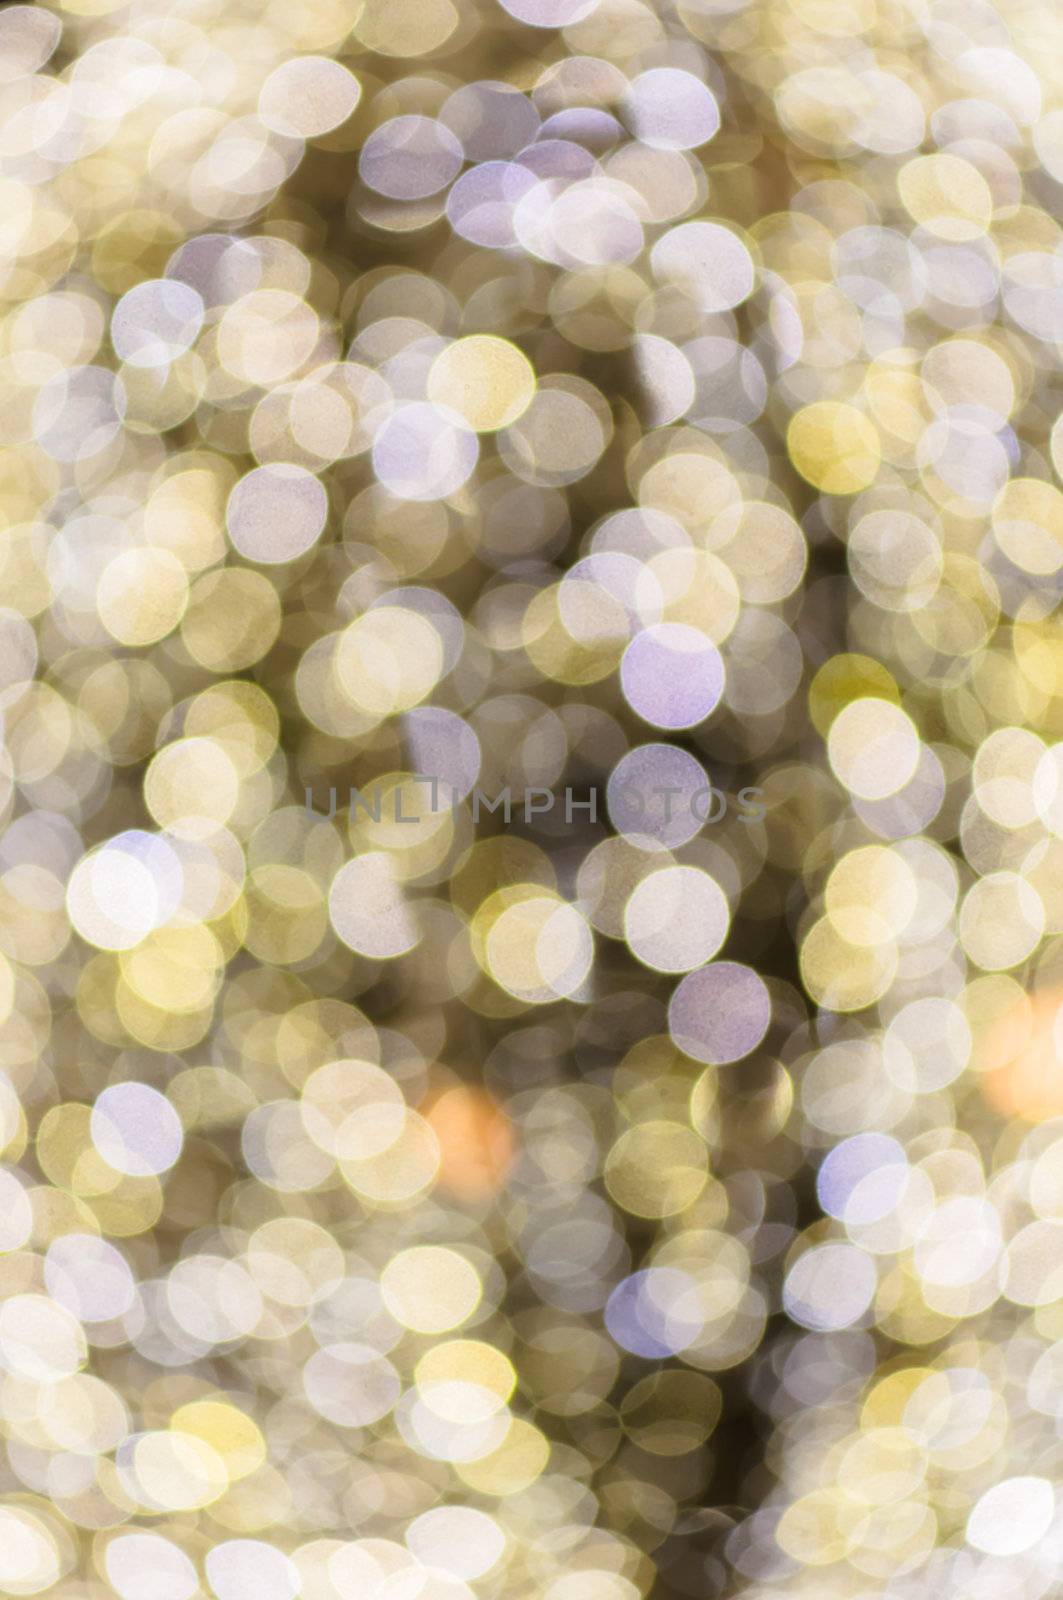 Out of focus dots by svedoliver